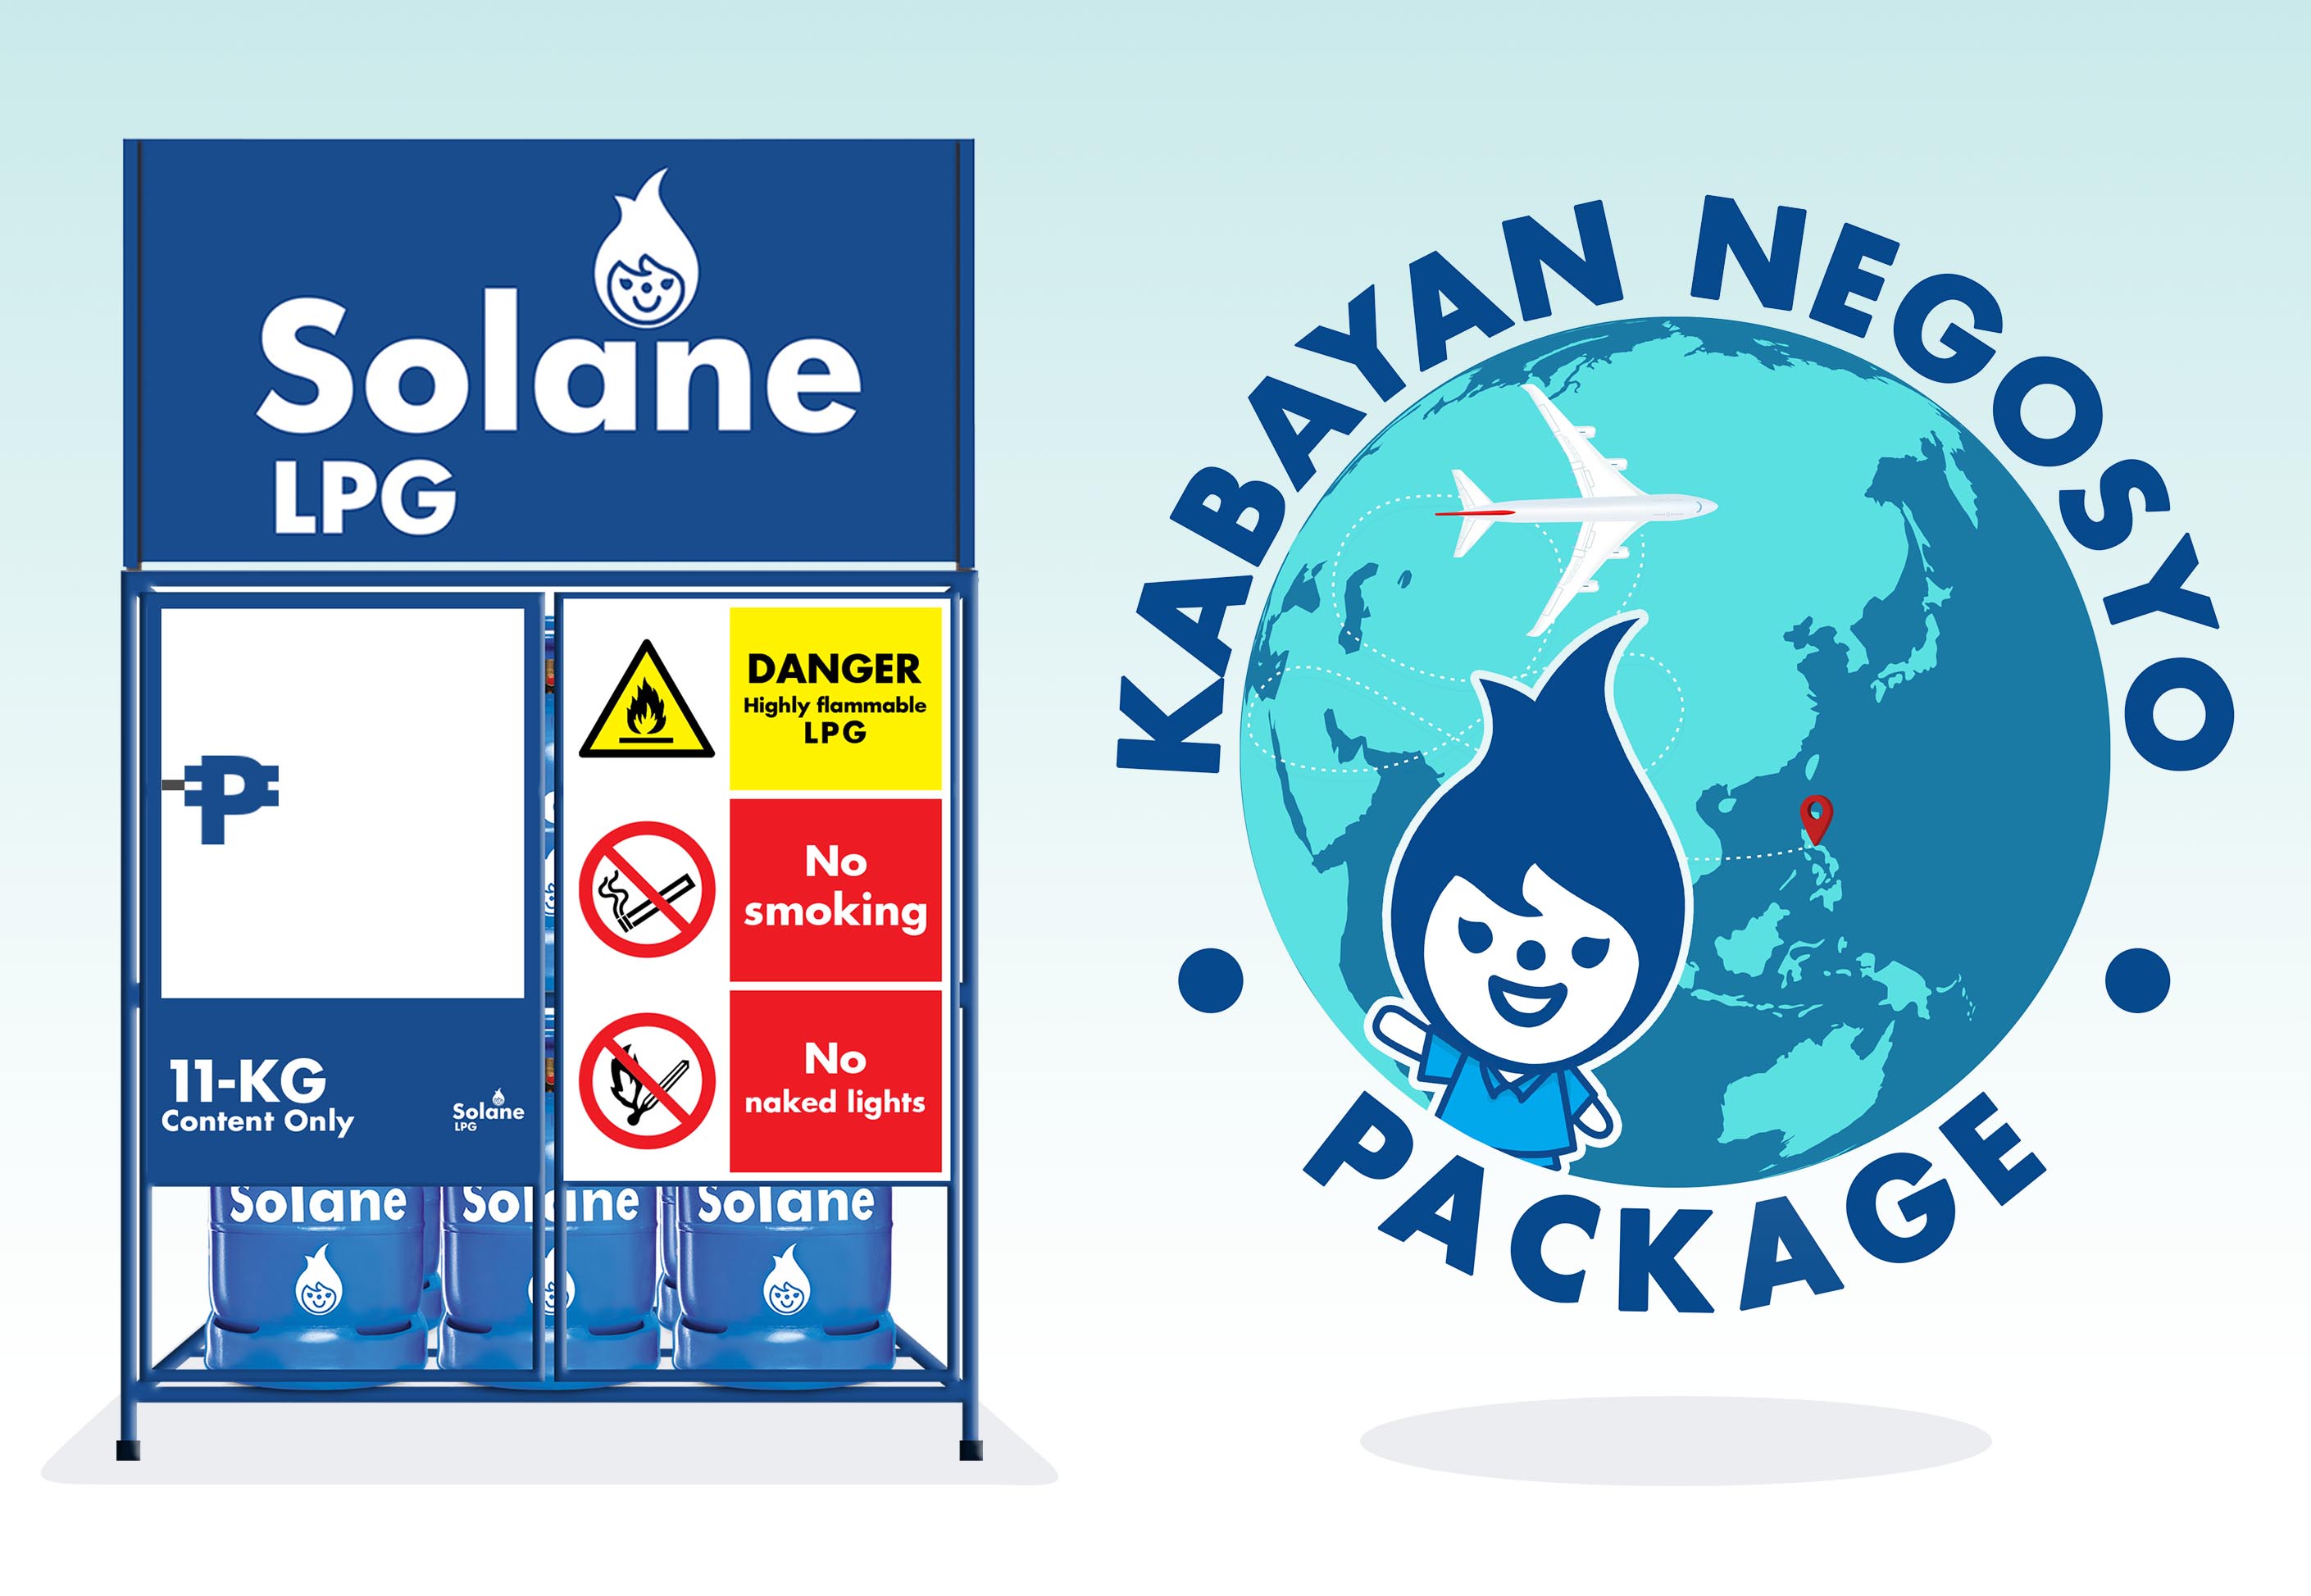 Solane offers affordable business package to OFWs